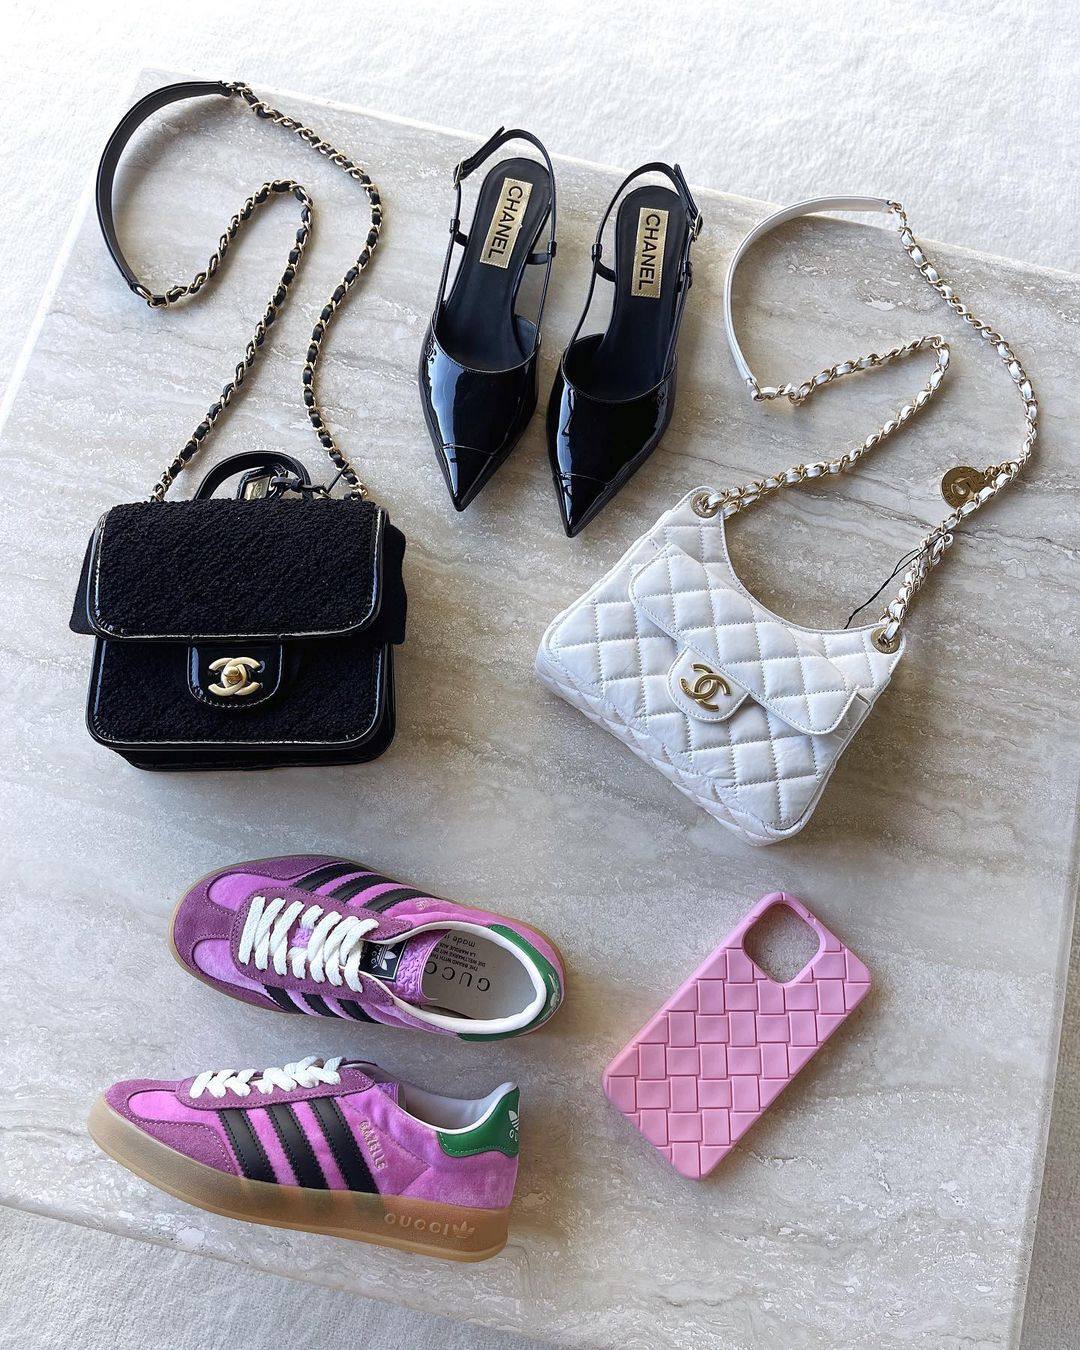 Various online platforms connect clued-up digital shoppers with vintage designer pieces sourced all over the world, such as these preloved Chanel, Gucci and Bottega Veneta accessories available from Gab Waller. Photo: Handout